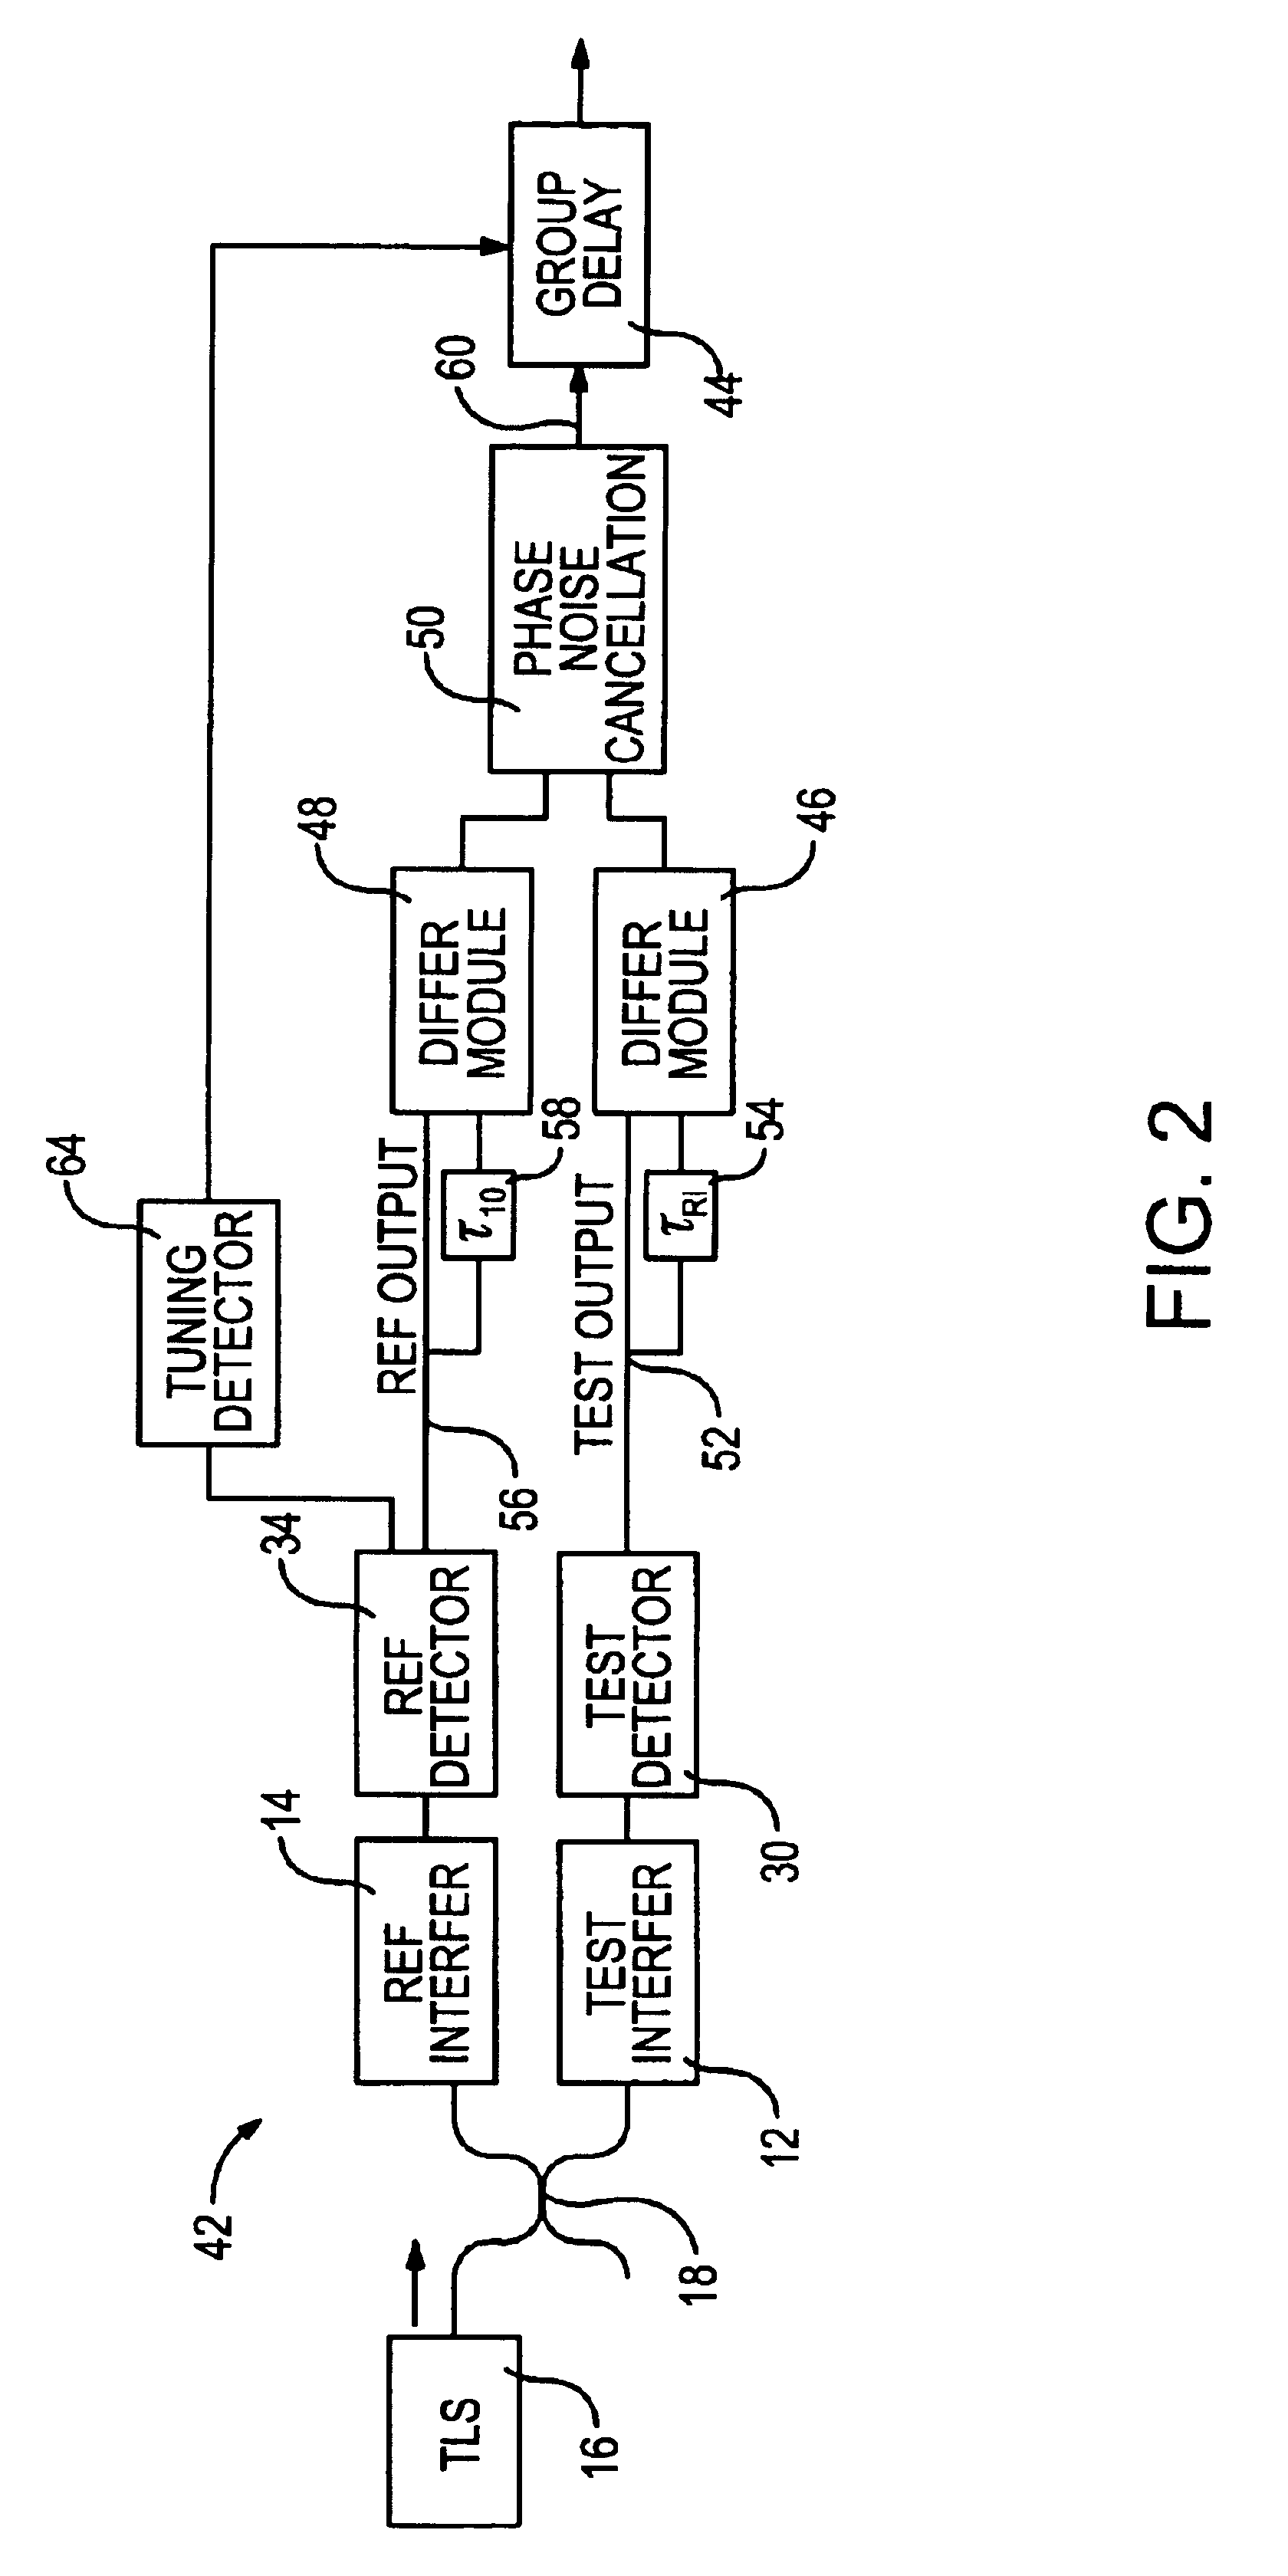 Phase noise compensation in an interferometric system